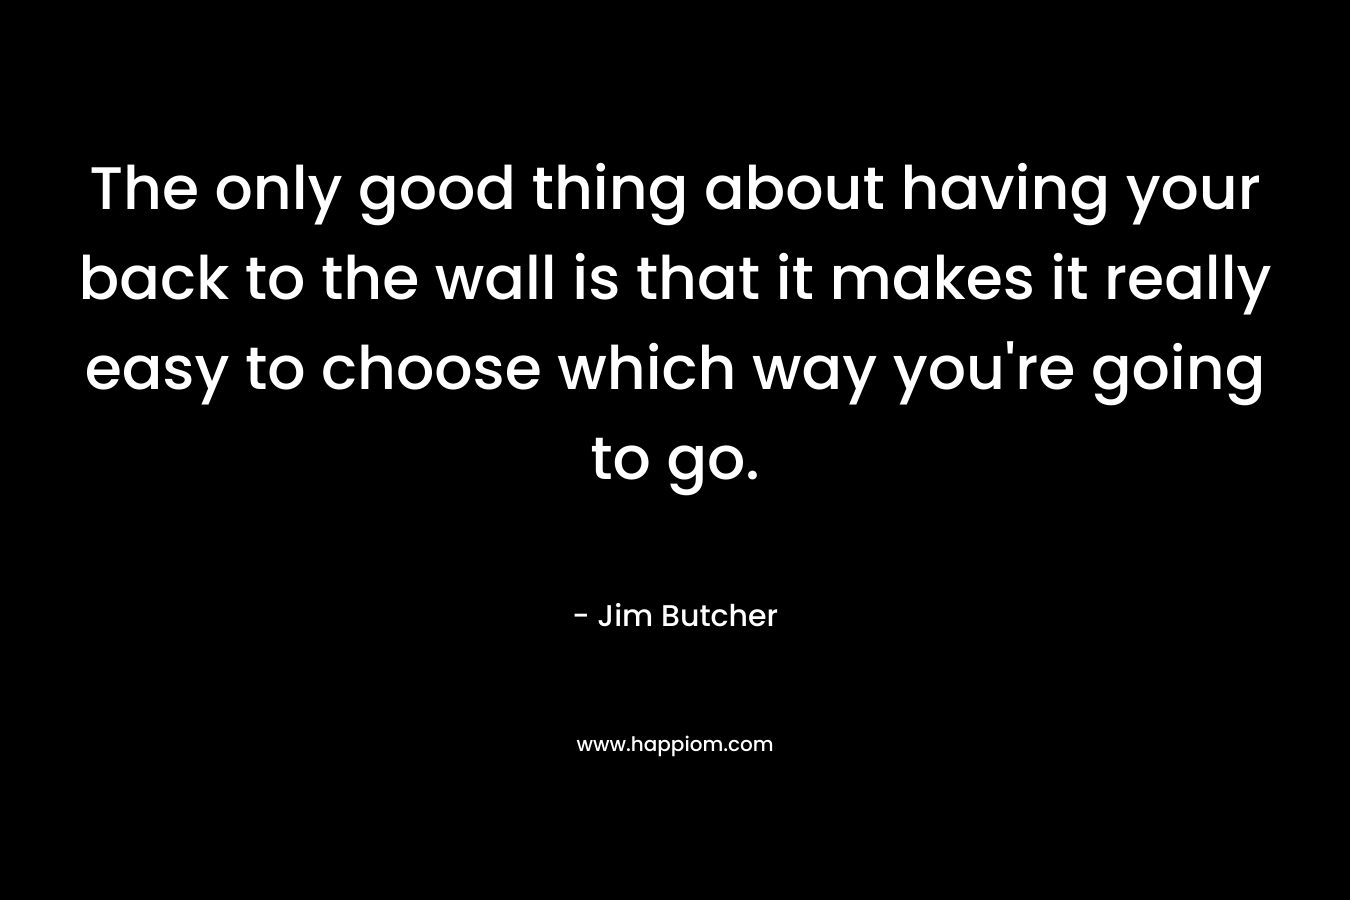 The only good thing about having your back to the wall is that it makes it really easy to choose which way you're going to go.